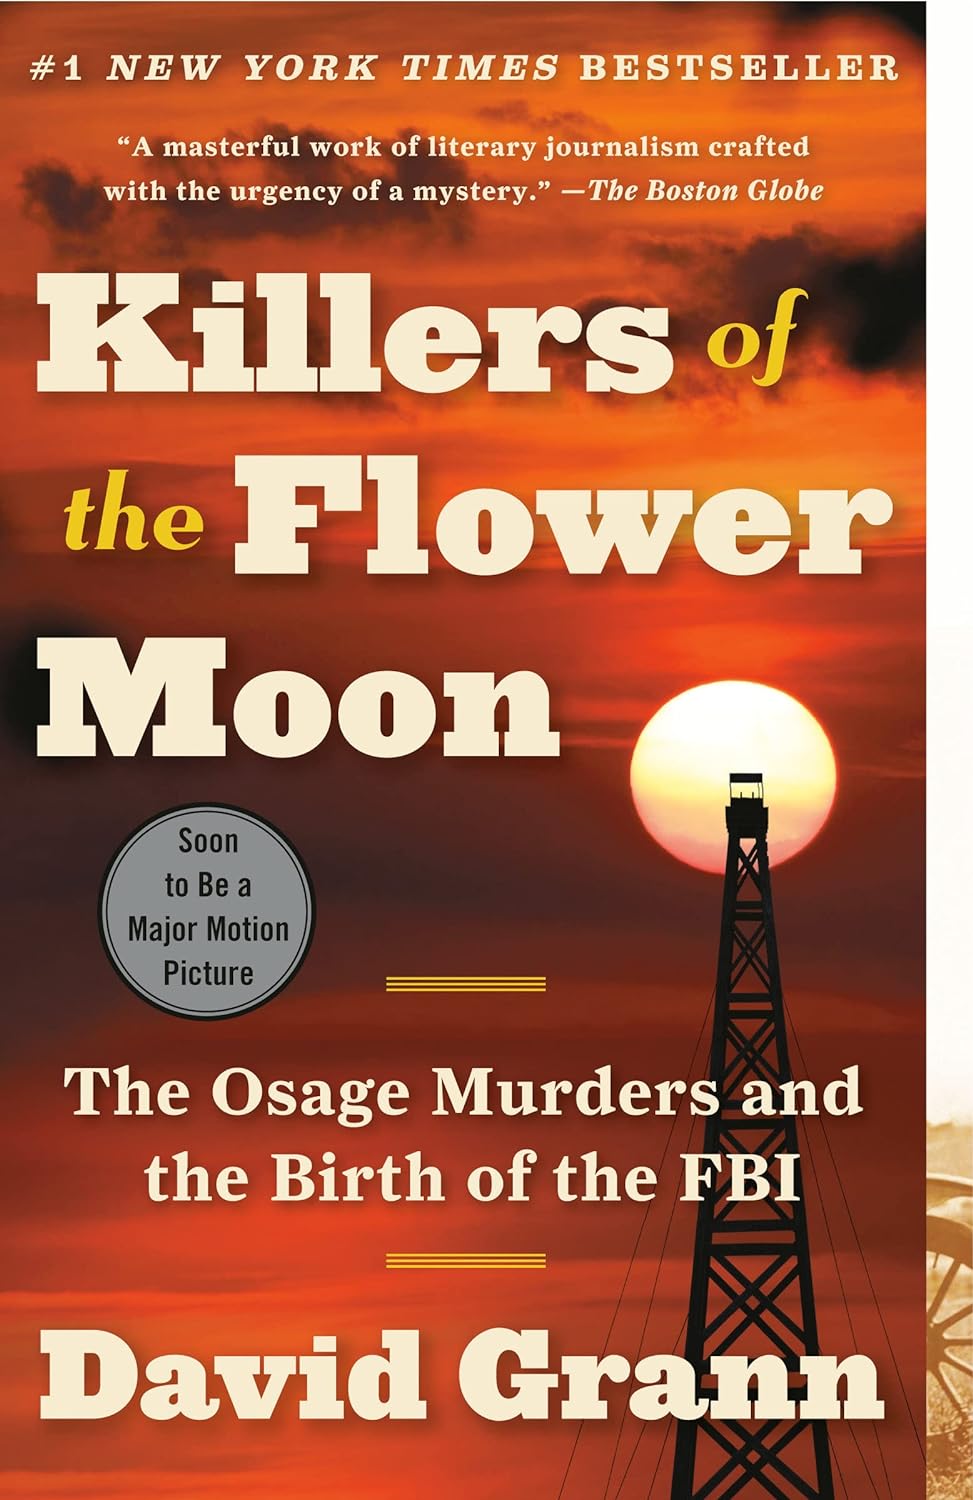 Killers of the Flower Moon: The Osage Murders and the Birth of the FBI (Paperback) by David Grann - Asylum Books